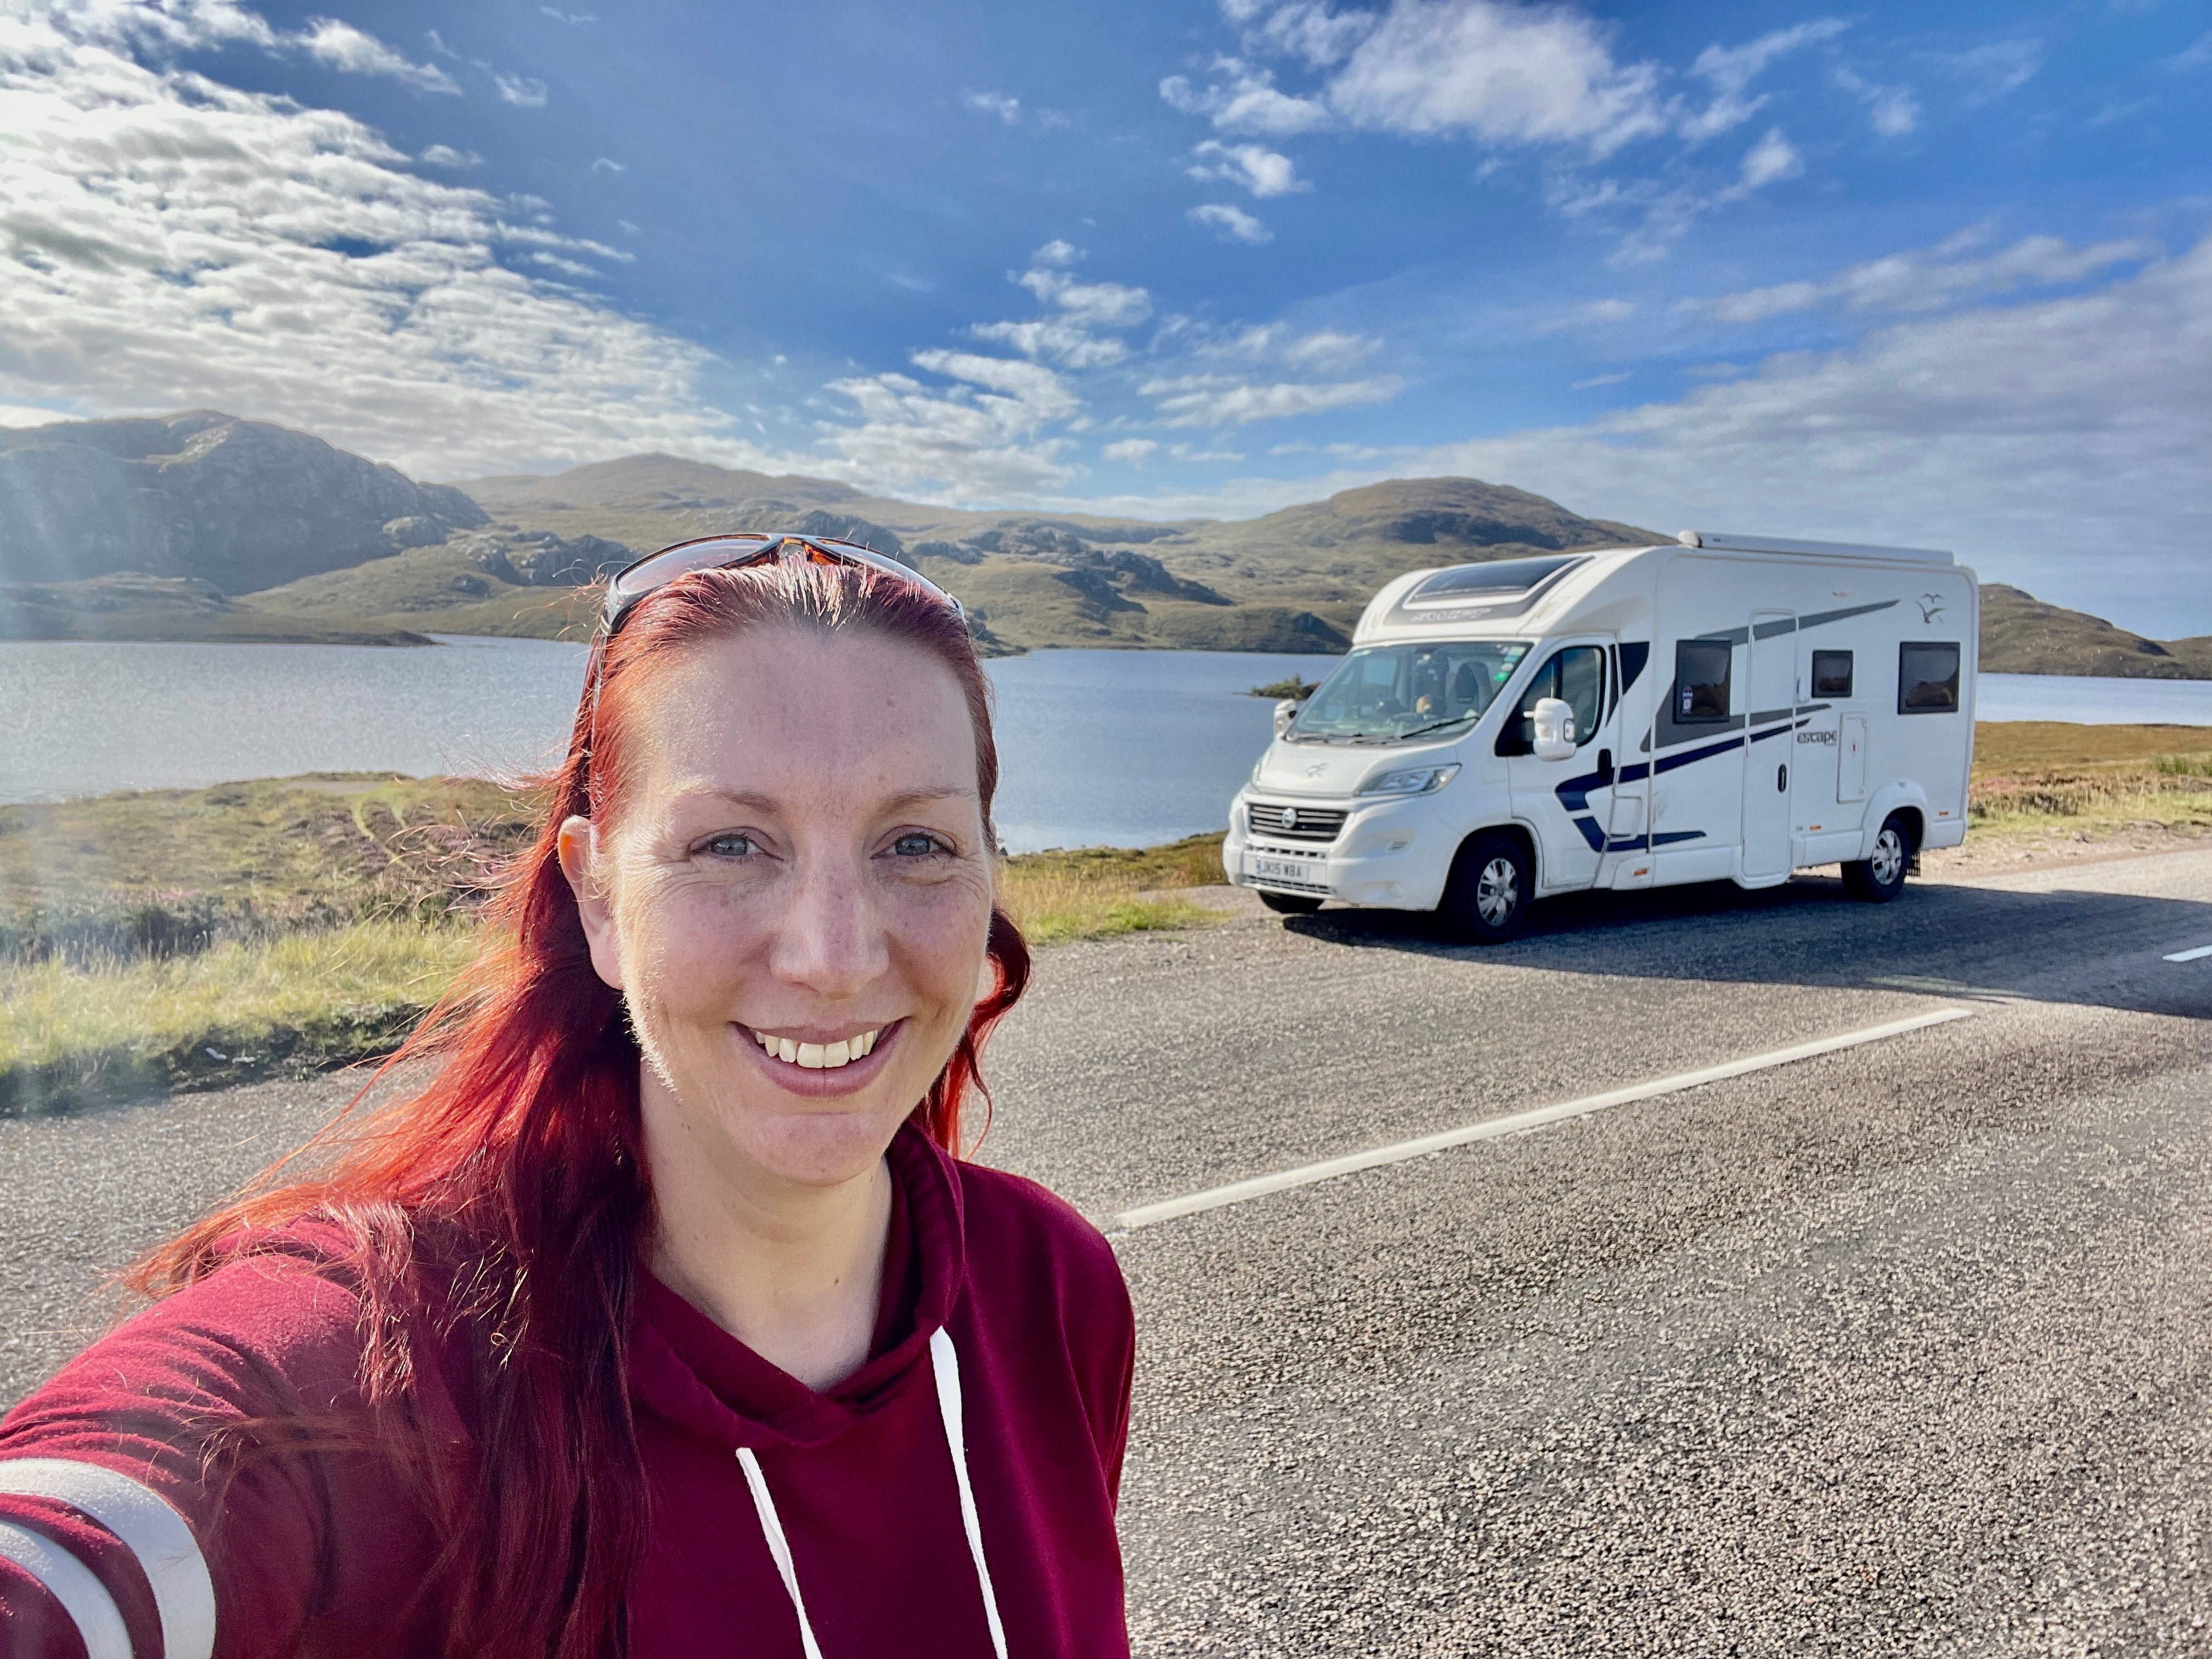 Kat Bird left her job as an air traffic controller and now tours the UK in a motorhome with her dog